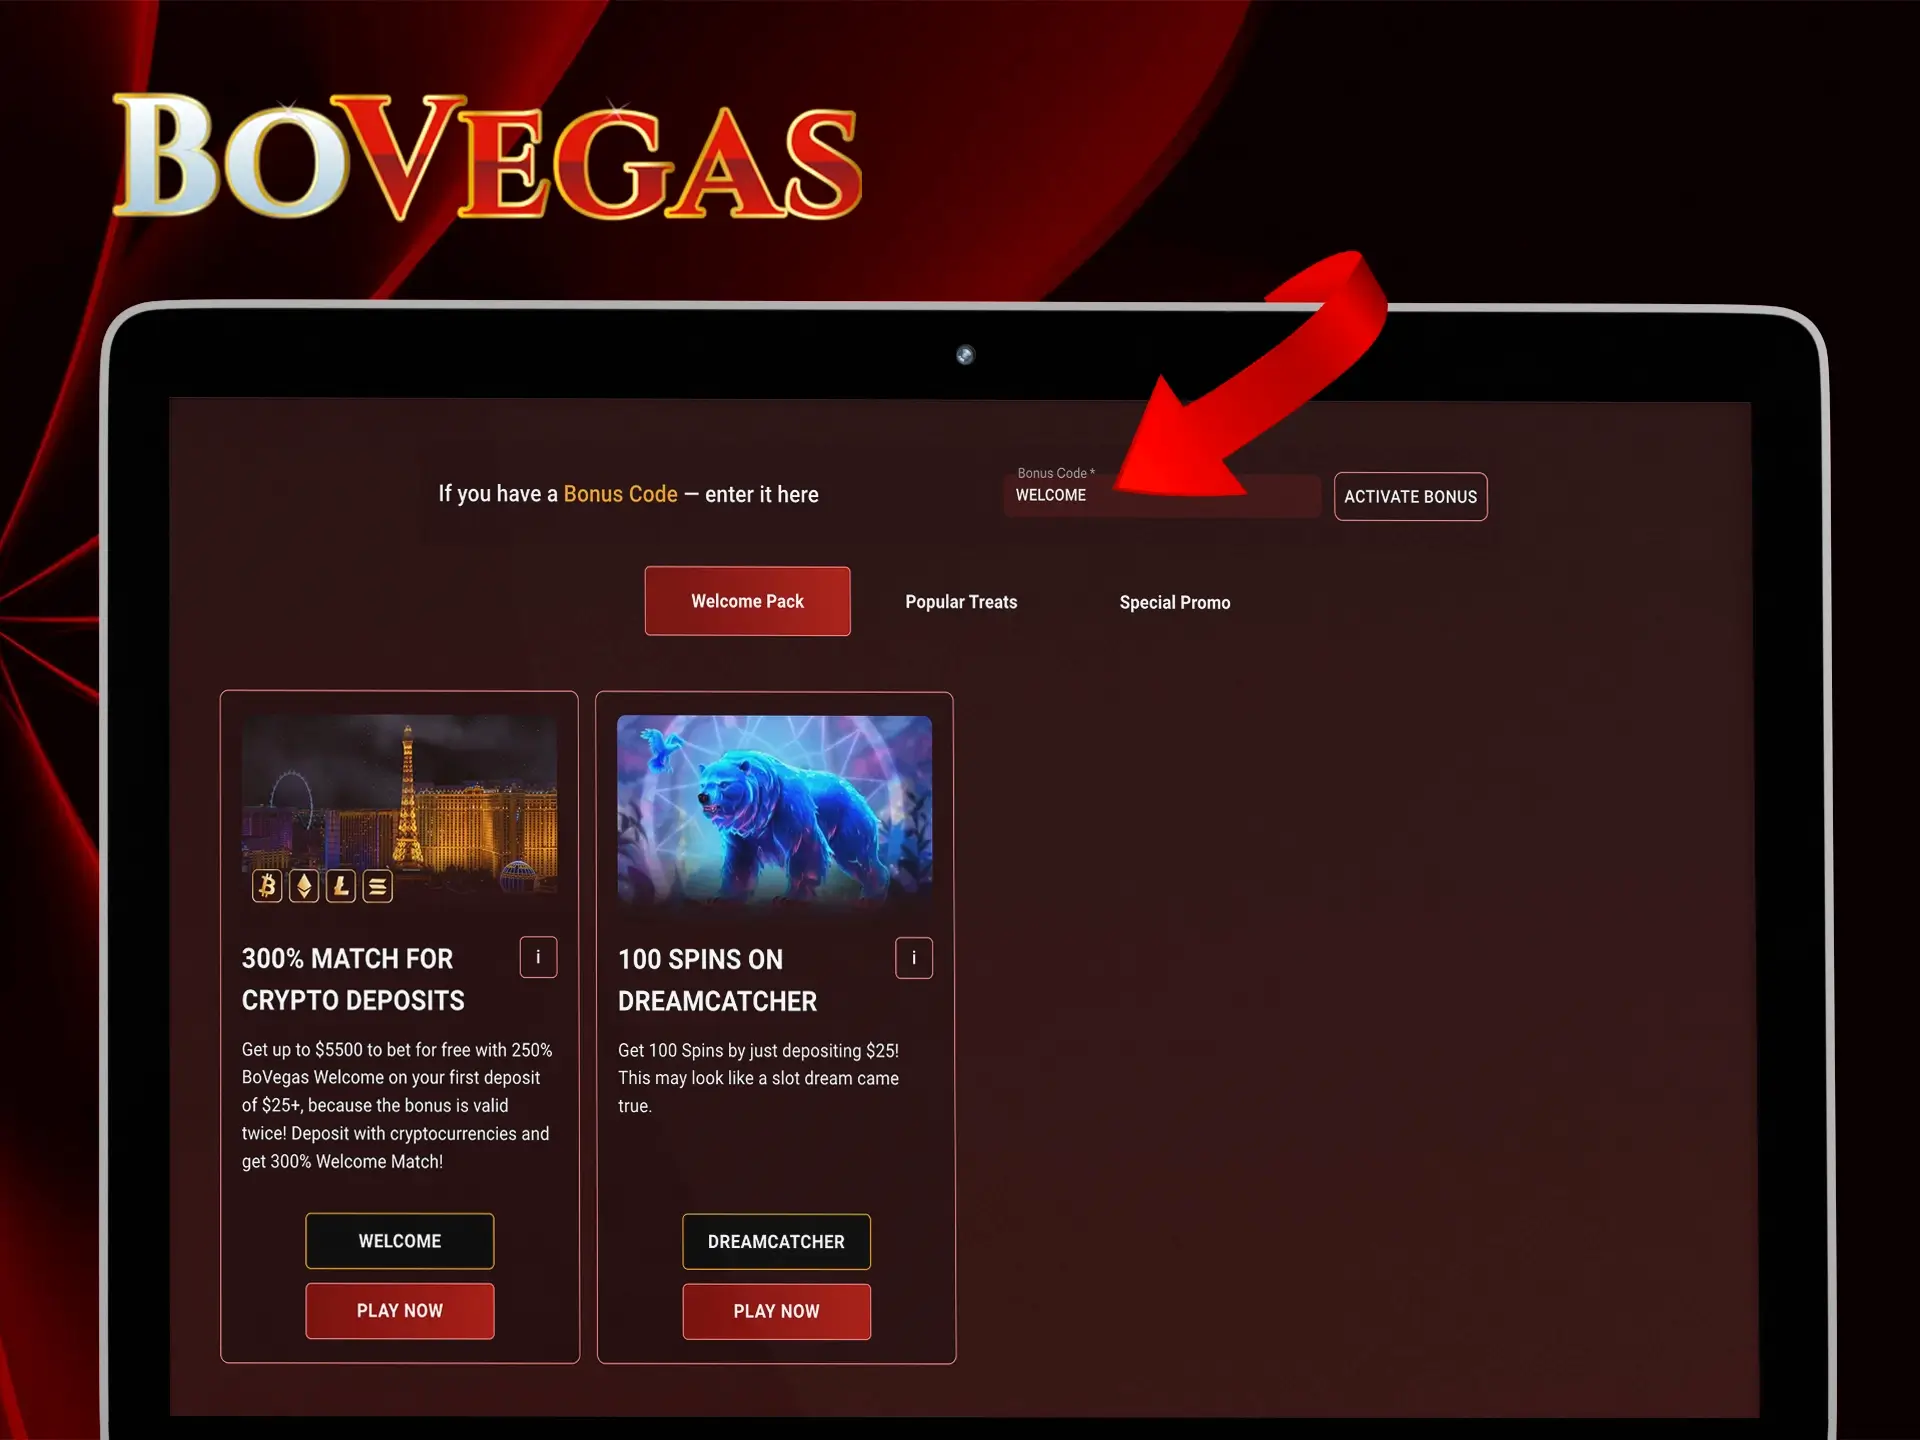 Register an account with BoVegas to enable the use of promo codes.